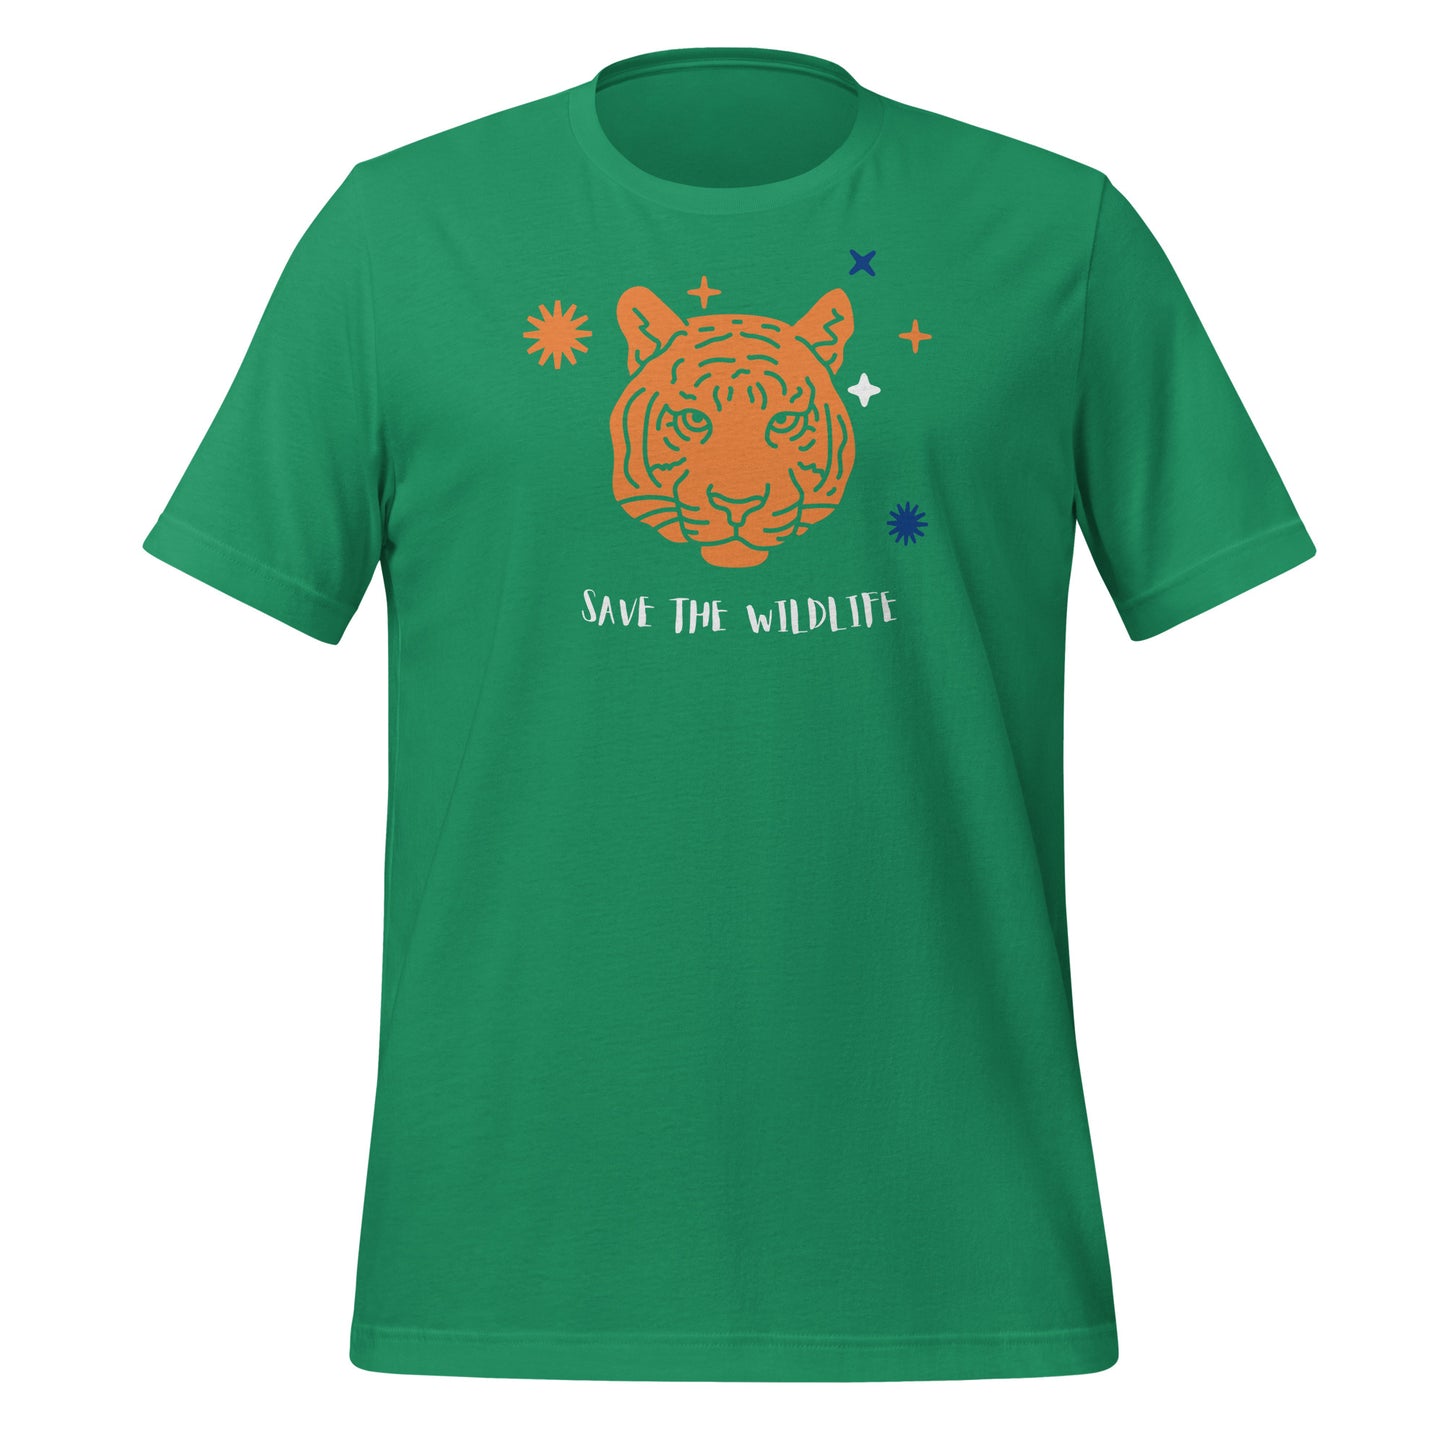 Save The Wild Life T-shirts - Eco-Friendly Designs